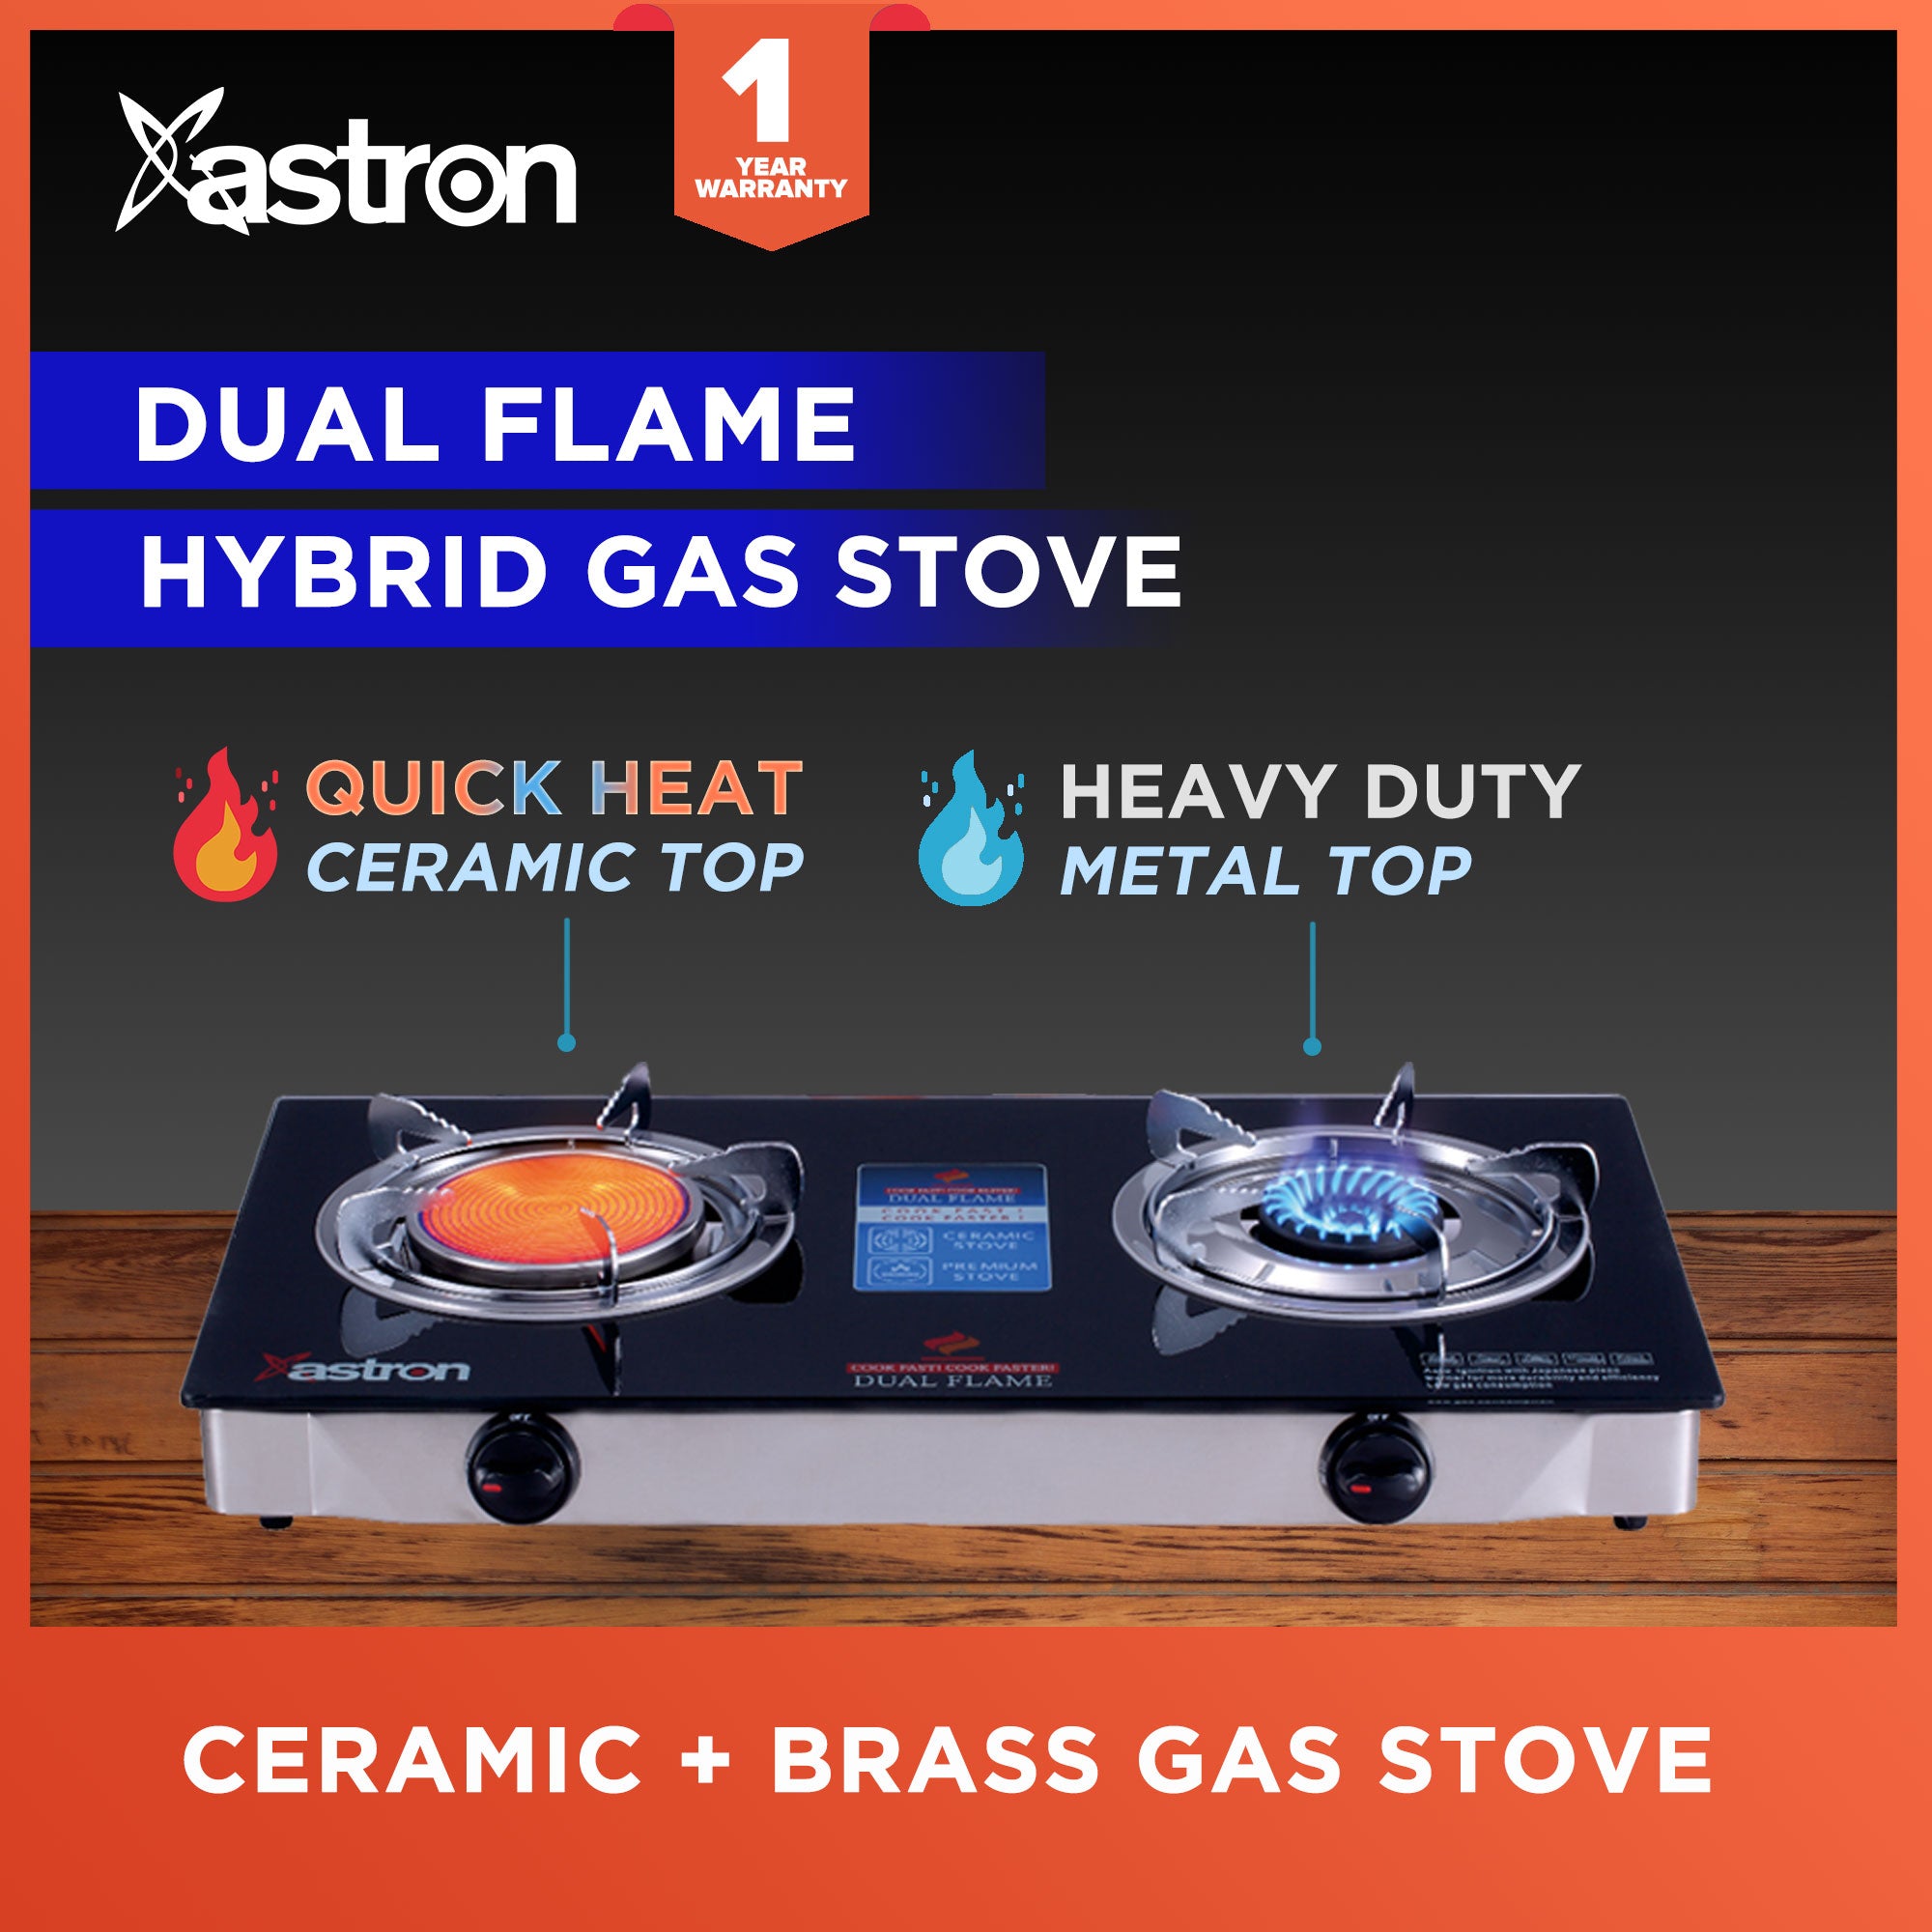 ASTRON DUAL FLAME Ceramic and Metal Double Burner Gas Stove with Tempered Glass Top infrared Burner Astron